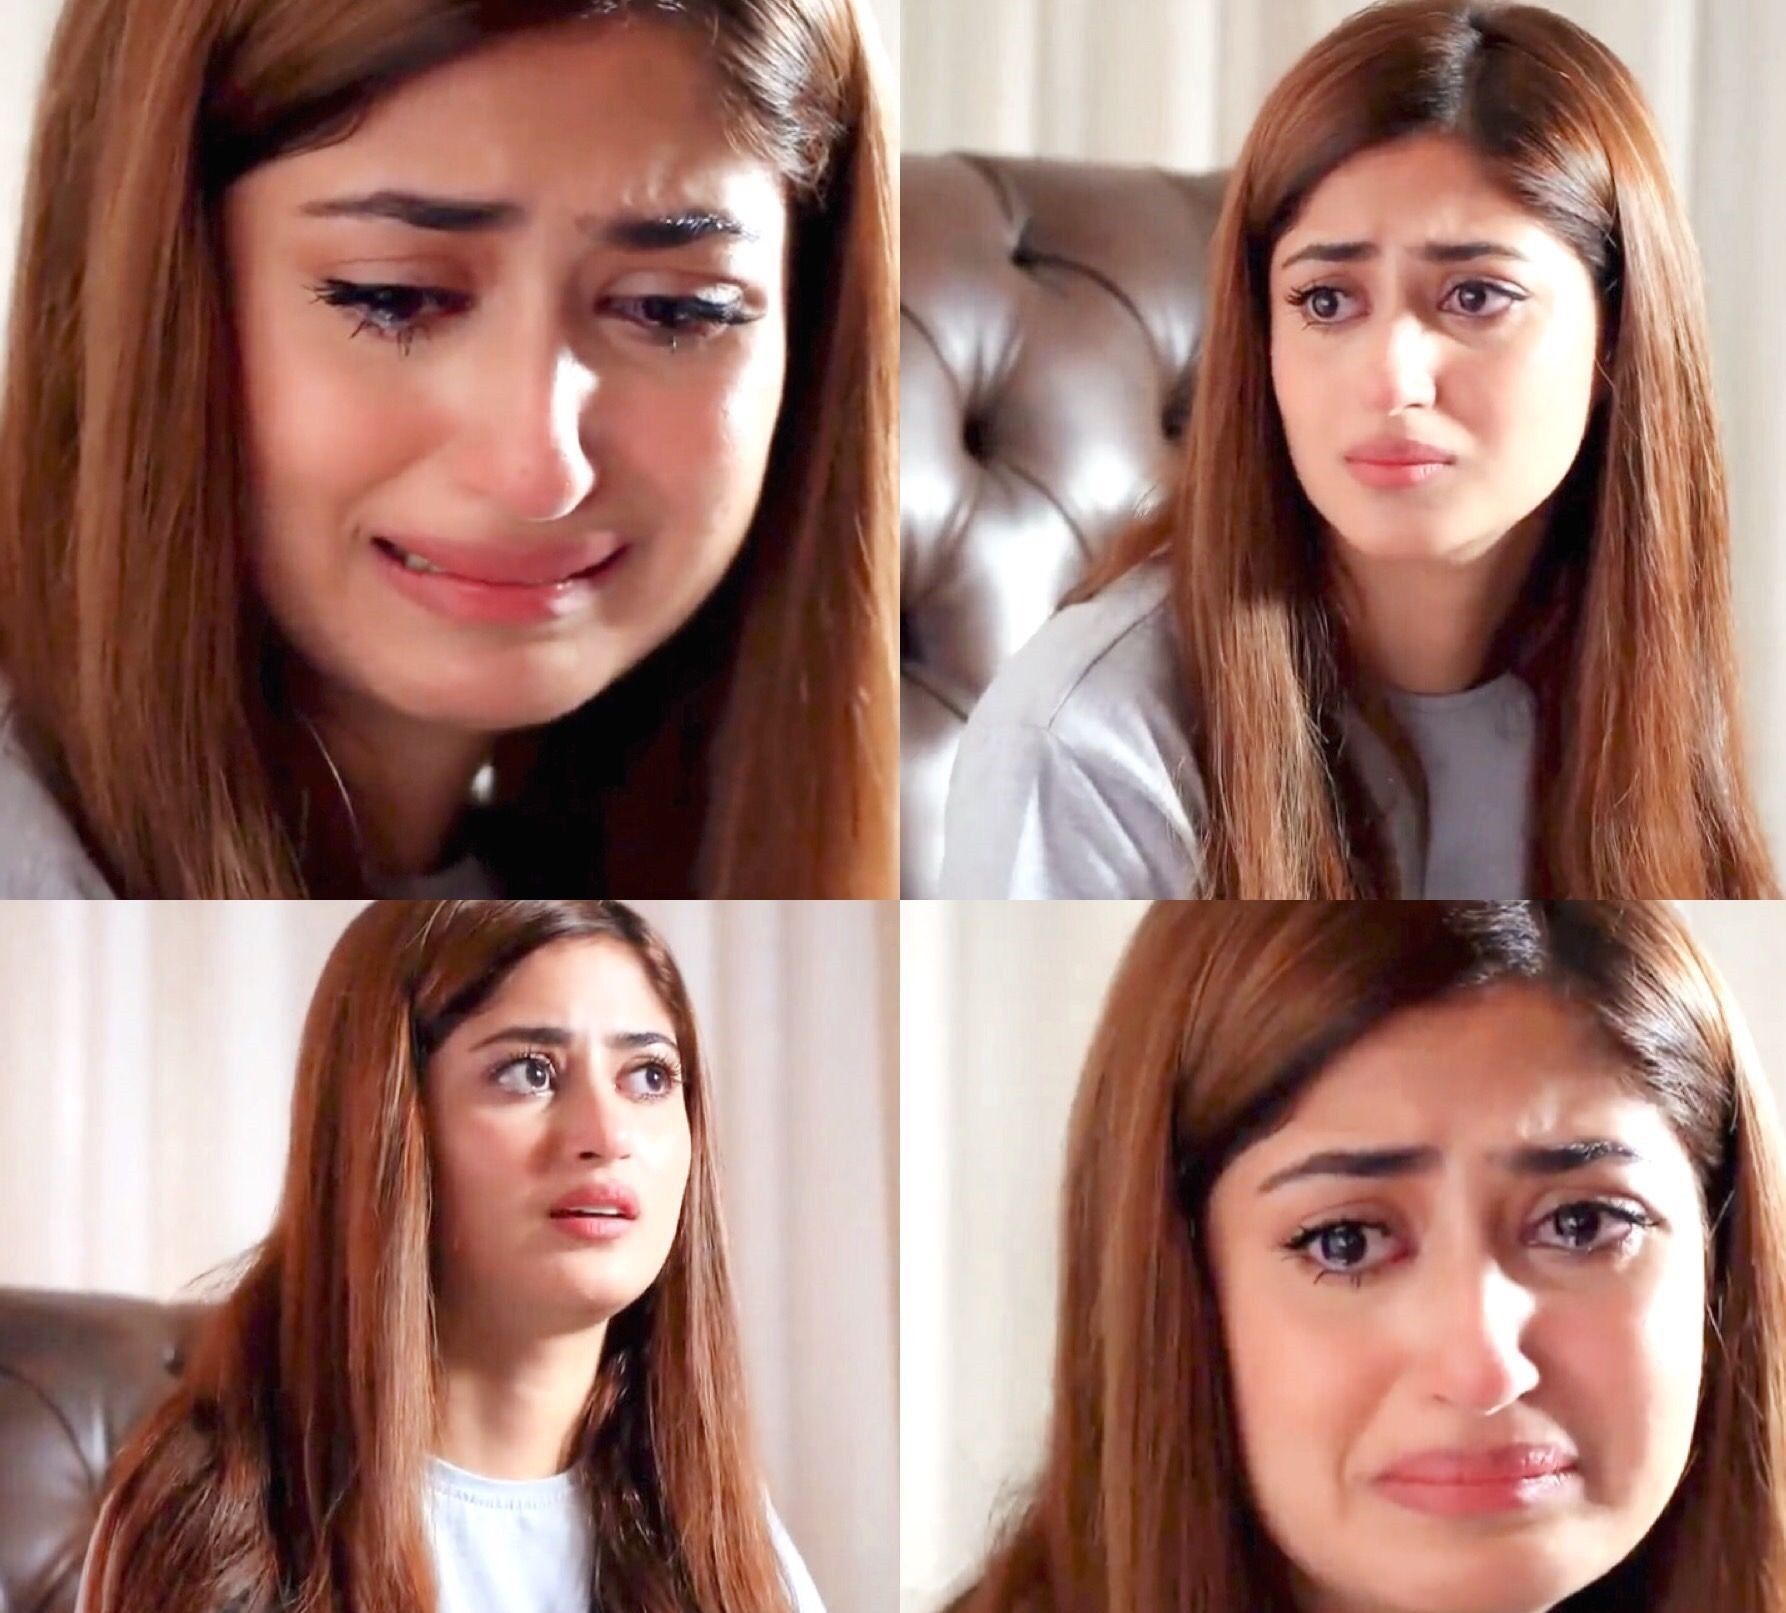 Sajal Aly is hands down the favorite and the most talented Pakistani actress of recent times. Whatever role she dons on, she does her best to ensure she aces at it. From romantic roles to funny scenes, innocent girl to a girl with a deep heart and a mind, she has acted on all and done all as well. But, even after giving us hits after hits, we do have a select few scenes that can hardly be replaced by anything new she does. We can surely add them to the list, but replace? Not happening anytime soon. So, here are some of the best scenes from Sajal Aly dramas that I personally adore, and love her acting in. Let’s go through them together. Sajal Aly Touches Her Hearts In Alif If you have been reading my writings here, you know I am not an avid drama fan, but Alif has my heart. I can’t actually pick one scene that I prefer because this drama is a goldmine of that. This one scene from the beginning episodes of the drama is super emotional. You feel the depth of human hopelessness yet the connection to hold onto the One when in despair. This beautiful scene is reminiscent of so many times when we felt hopeless, but we held onto hope just for the sake of it, because we believe there is certainly something better to come. Here you go: Zobia With Her Father In Yaqeen Ka Safar Zobia’s relationship with her father was that of a roller coaster in the drama. From a man who killed his wife and abused his terrified daughter to a relationship between inseparable father and daughter, this drama is sure to leave you emotional and crying. After Zobia’s innocent love story leads her in trouble, only her father is the one who understands and supports her. In this beautiful scene, she shares the sad reality of the world we live in. It connects with us on so many levels. It, indeed, is true. Allah forgives us all, but humans? They never do! Have a look at this emotional snippet of the scene: SAhad In Yeh Dil Mera Yeh Dil Mera has a very love-hate relationship with the lead couple. Due to the years-worth history that leads to this marriage, the ultimate goal of which is revenge, there are times when you see the couple quarreling and not being able to understand each other. This scene is one of those when Sajal is still in the dark and cannot decipher why her husband treats her the way he does. But, it still is strong and one of our favorites:  SAhad In Angan Once again, the famous duo together. But, this time, the scene is super cute. This is one of the reasons people love this couple because their on-screen chemistry is as solid as their off-screen one. We love this scene where the two have this naughty brawl a very old-school way of the begotten times. Have a look at this super cheesy scene here! Aina’s Nightmares In Yeh Dil Mera Yeh Dil Mera once again, because this is the epitome of Sajal’s acting. Ahad did her best as well, but nothing can compete the way Sajal donned on the role. Among the many other scenes that we loved, Aina’s nightmares and how she lived them on-screen are the best. This goes on to prove her credibility as an actress because you feel that Sajal is living the scene. Here, you can see for yourself:  These were just some of the scenes that we loved Sajal Aly in. You can watch any drama and I can bet, this girl won’t leave you unsatisfied.